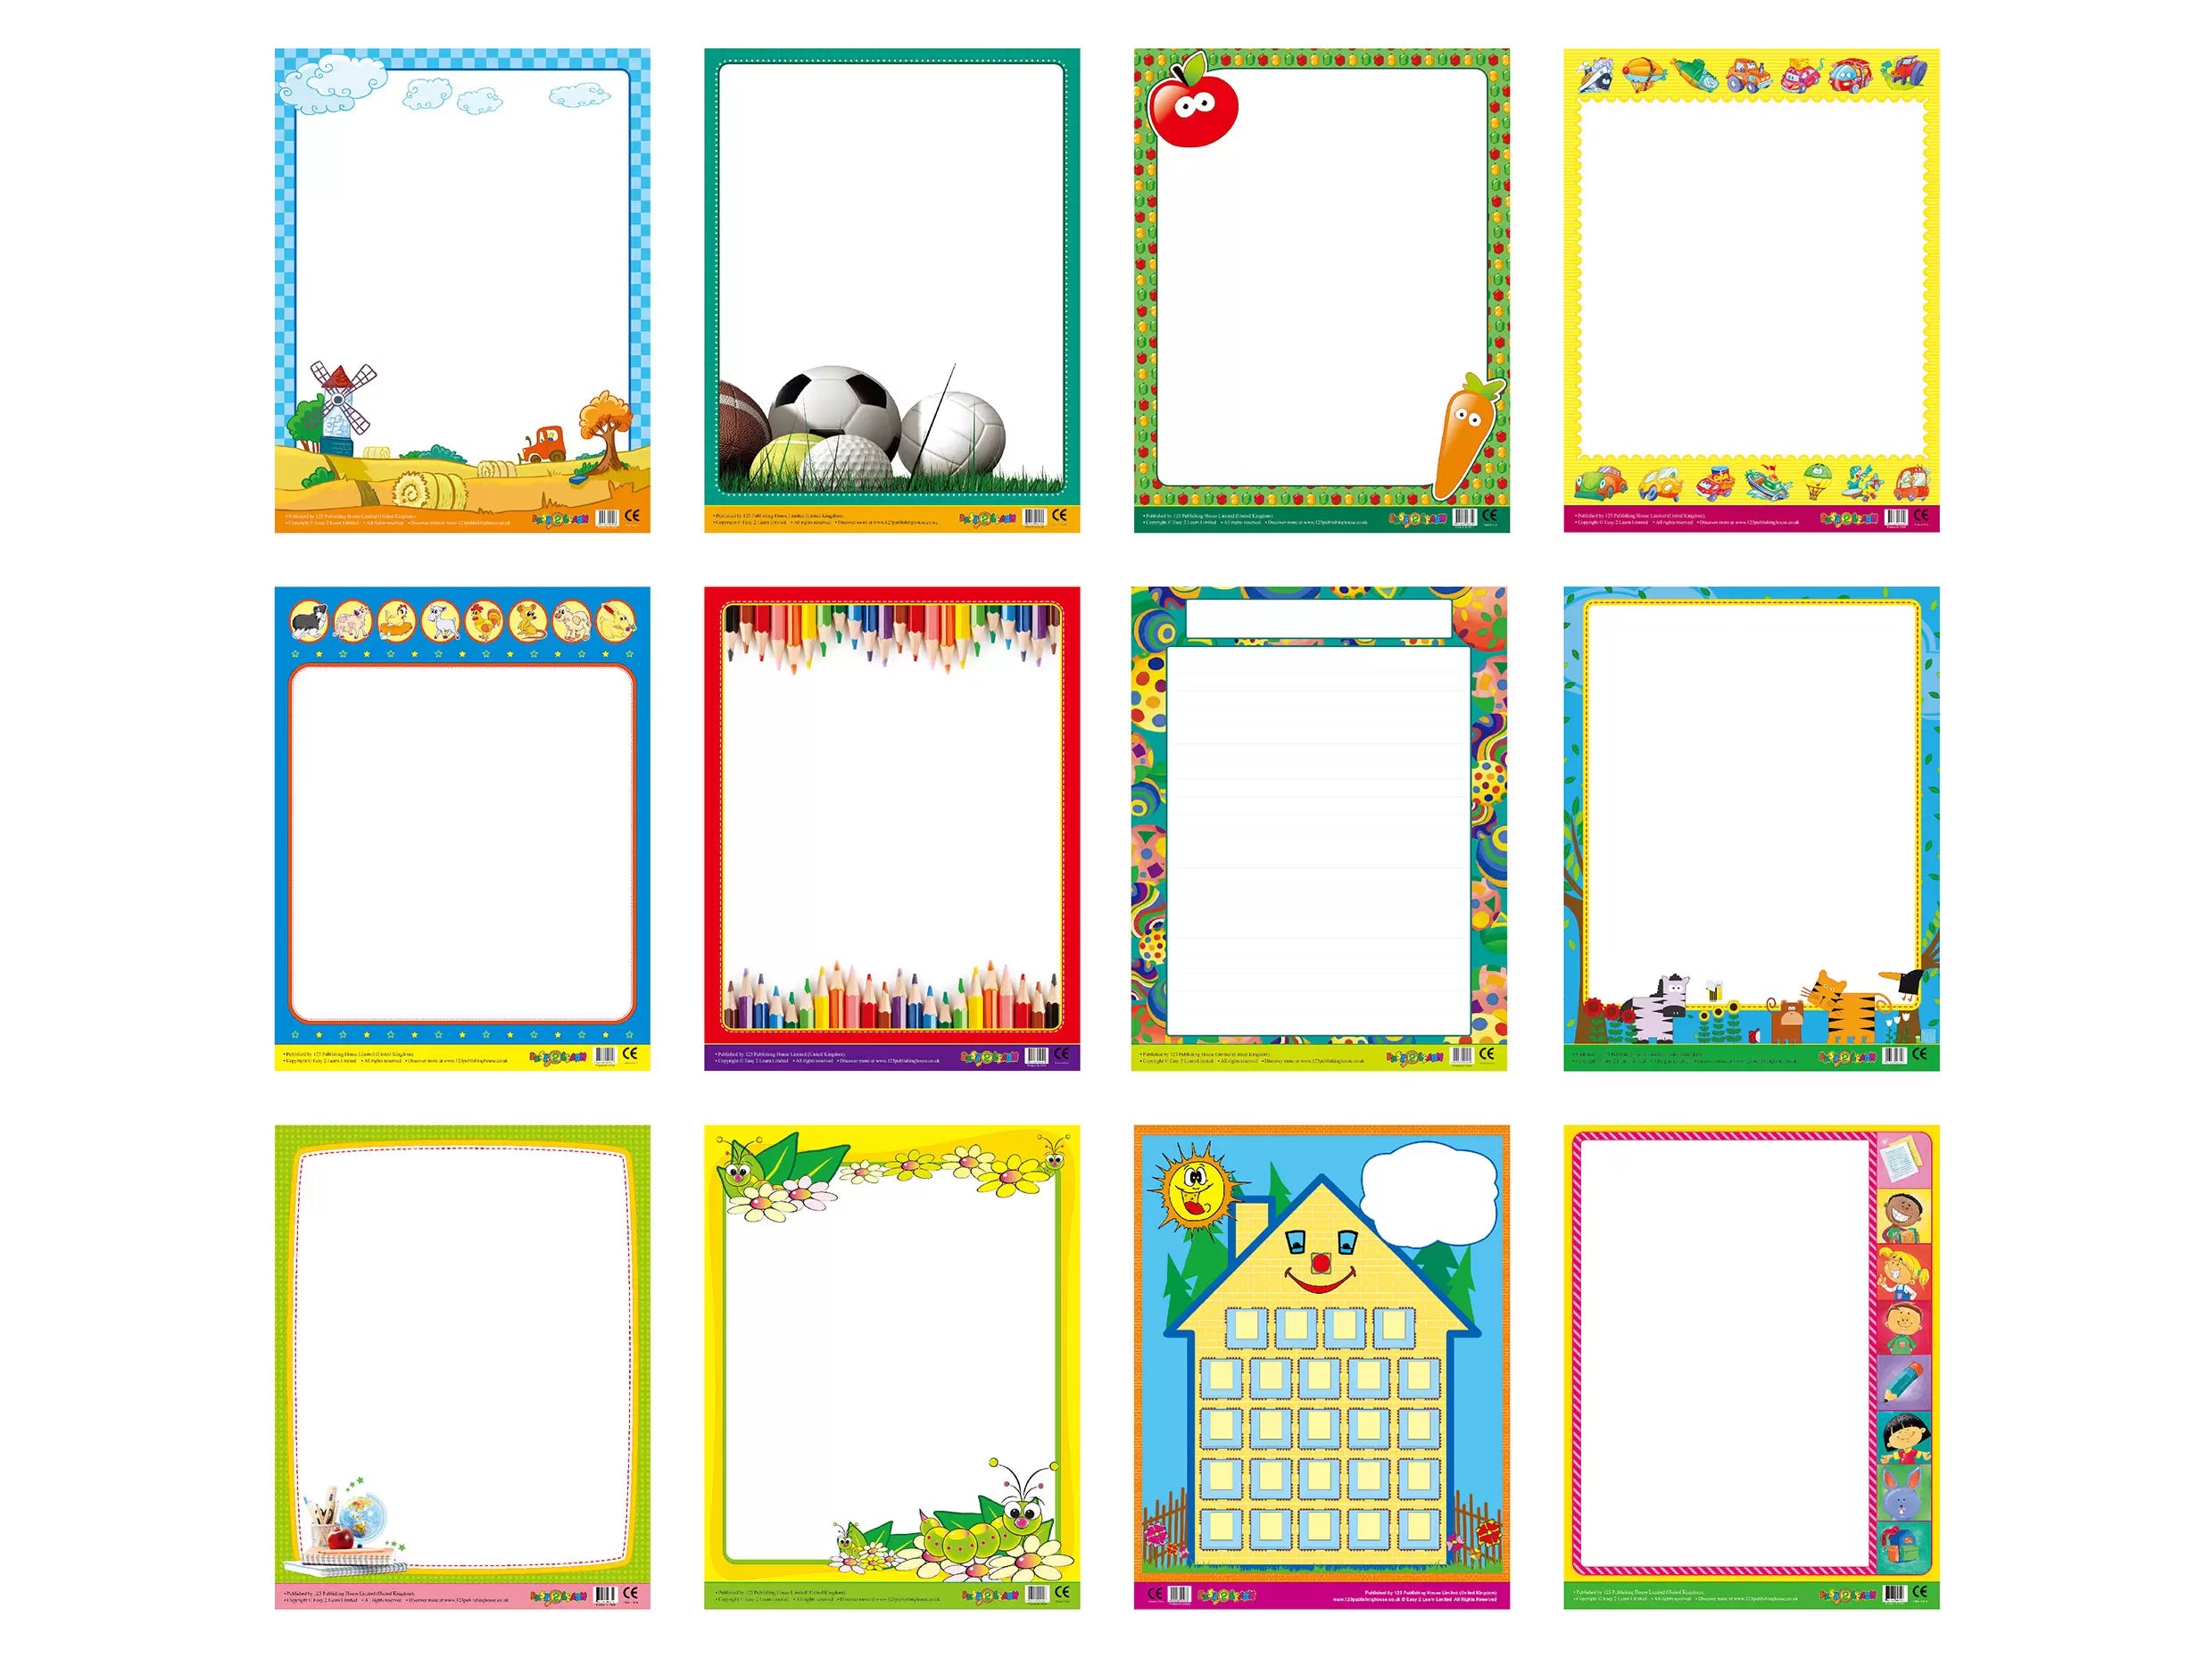 Write-On Charts (12 Wall Charts) - Educational Wall Chart Pack in English